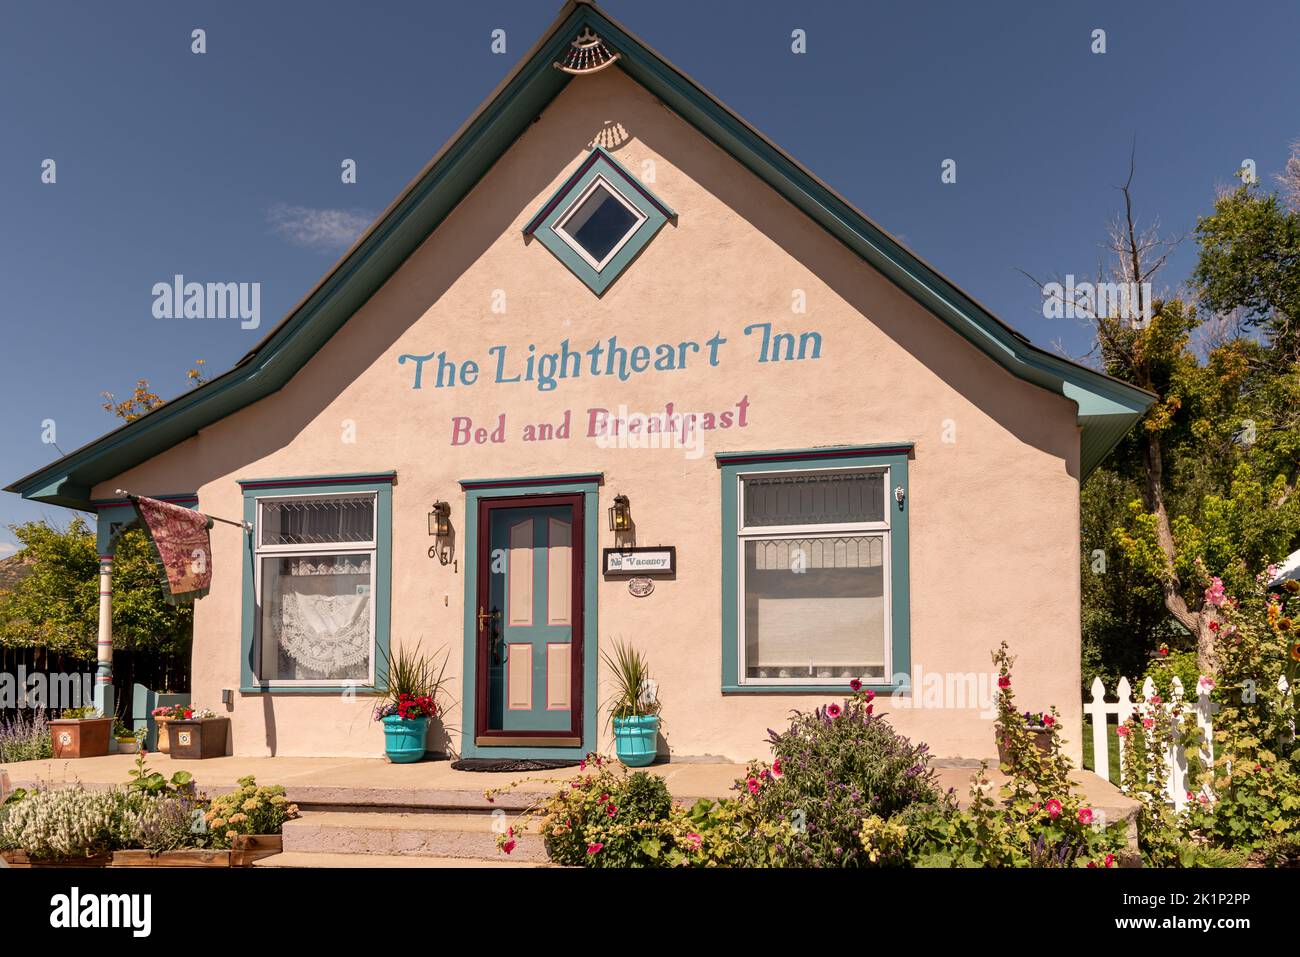 The Lightheart Inn Bed and Breakfast in Chama, Rio Arriba County, New Mexico. Stock Photo